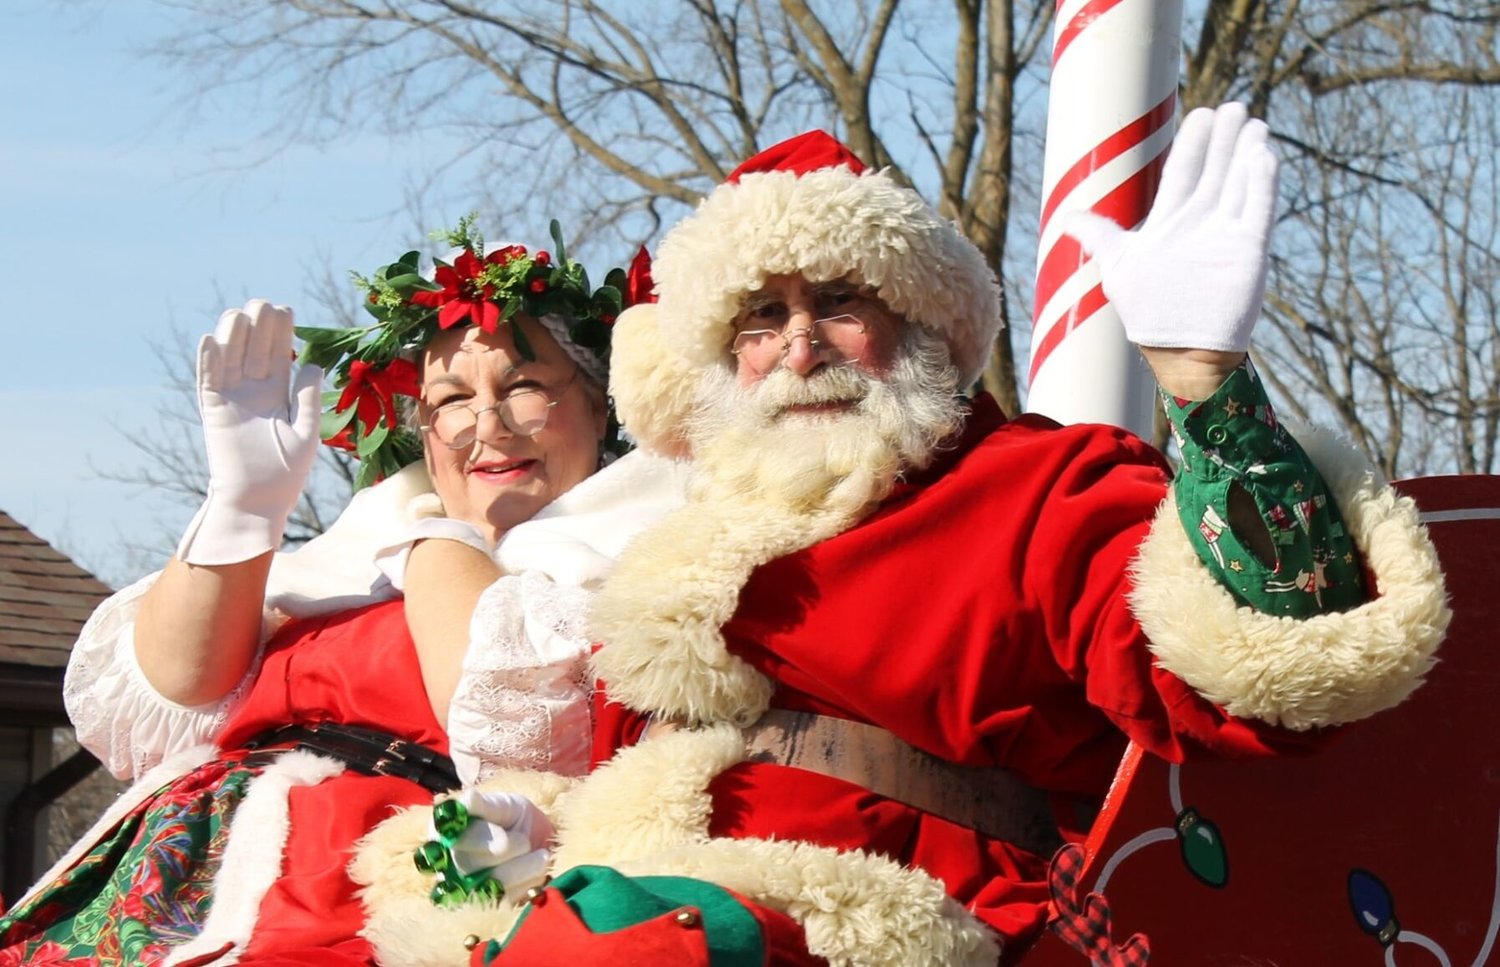 Santa and Mrs. Claus made their way through the Conway Christmas parade by sleigh on Saturday, Dec. 4, 2021. Spectators can expect these jolly visitors again in the Dec. 3 Conway Parade